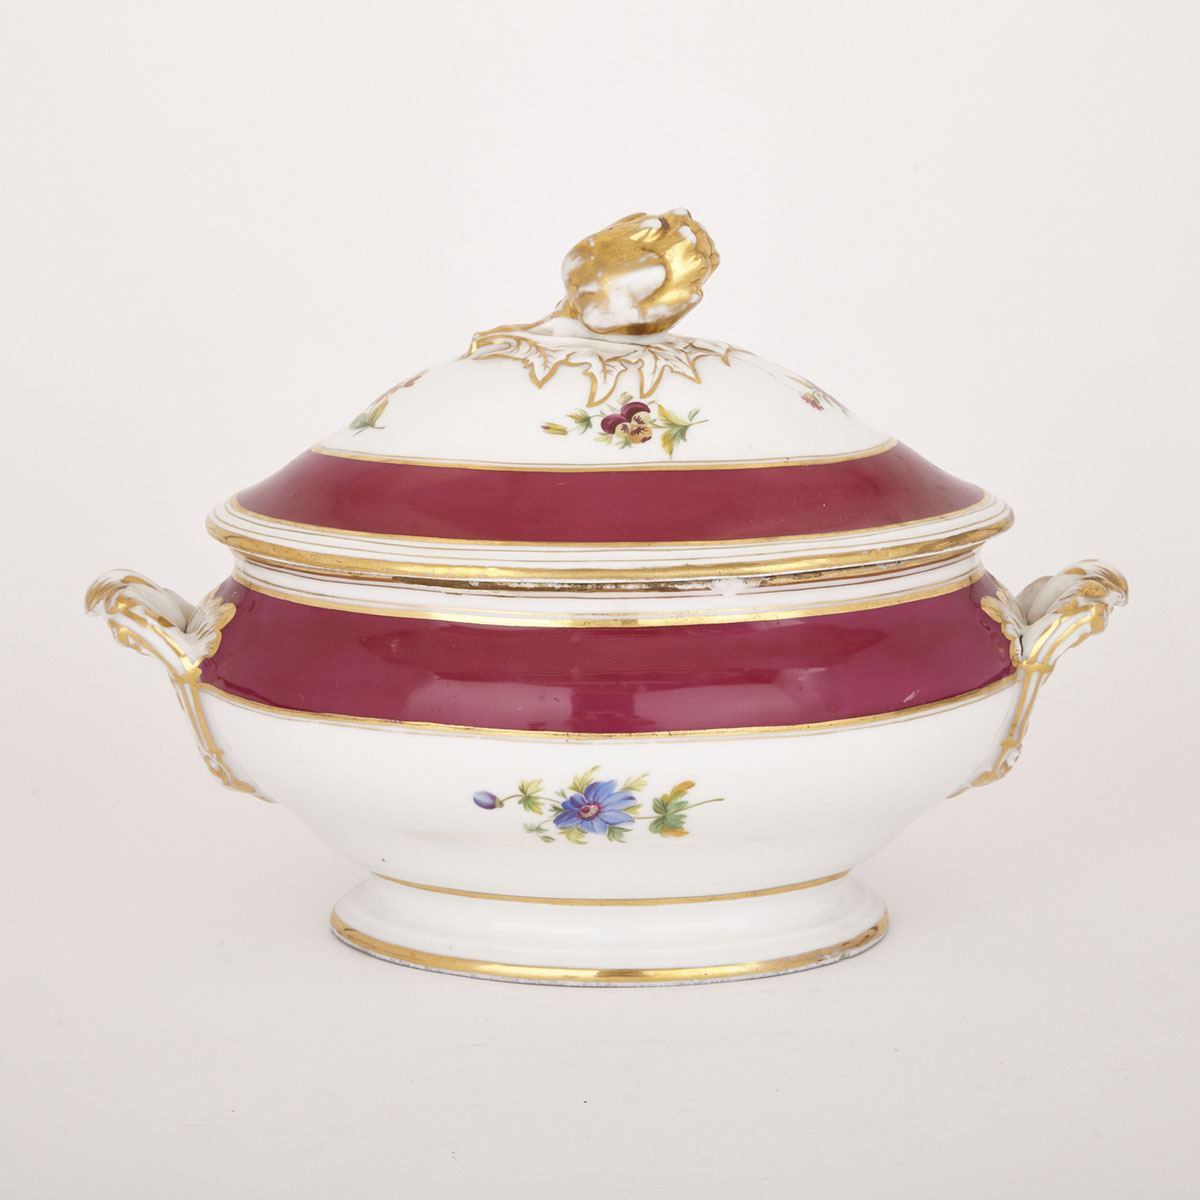 Paris Porcelain Claret Banded Oval Covered Soup Tureen, 19th century